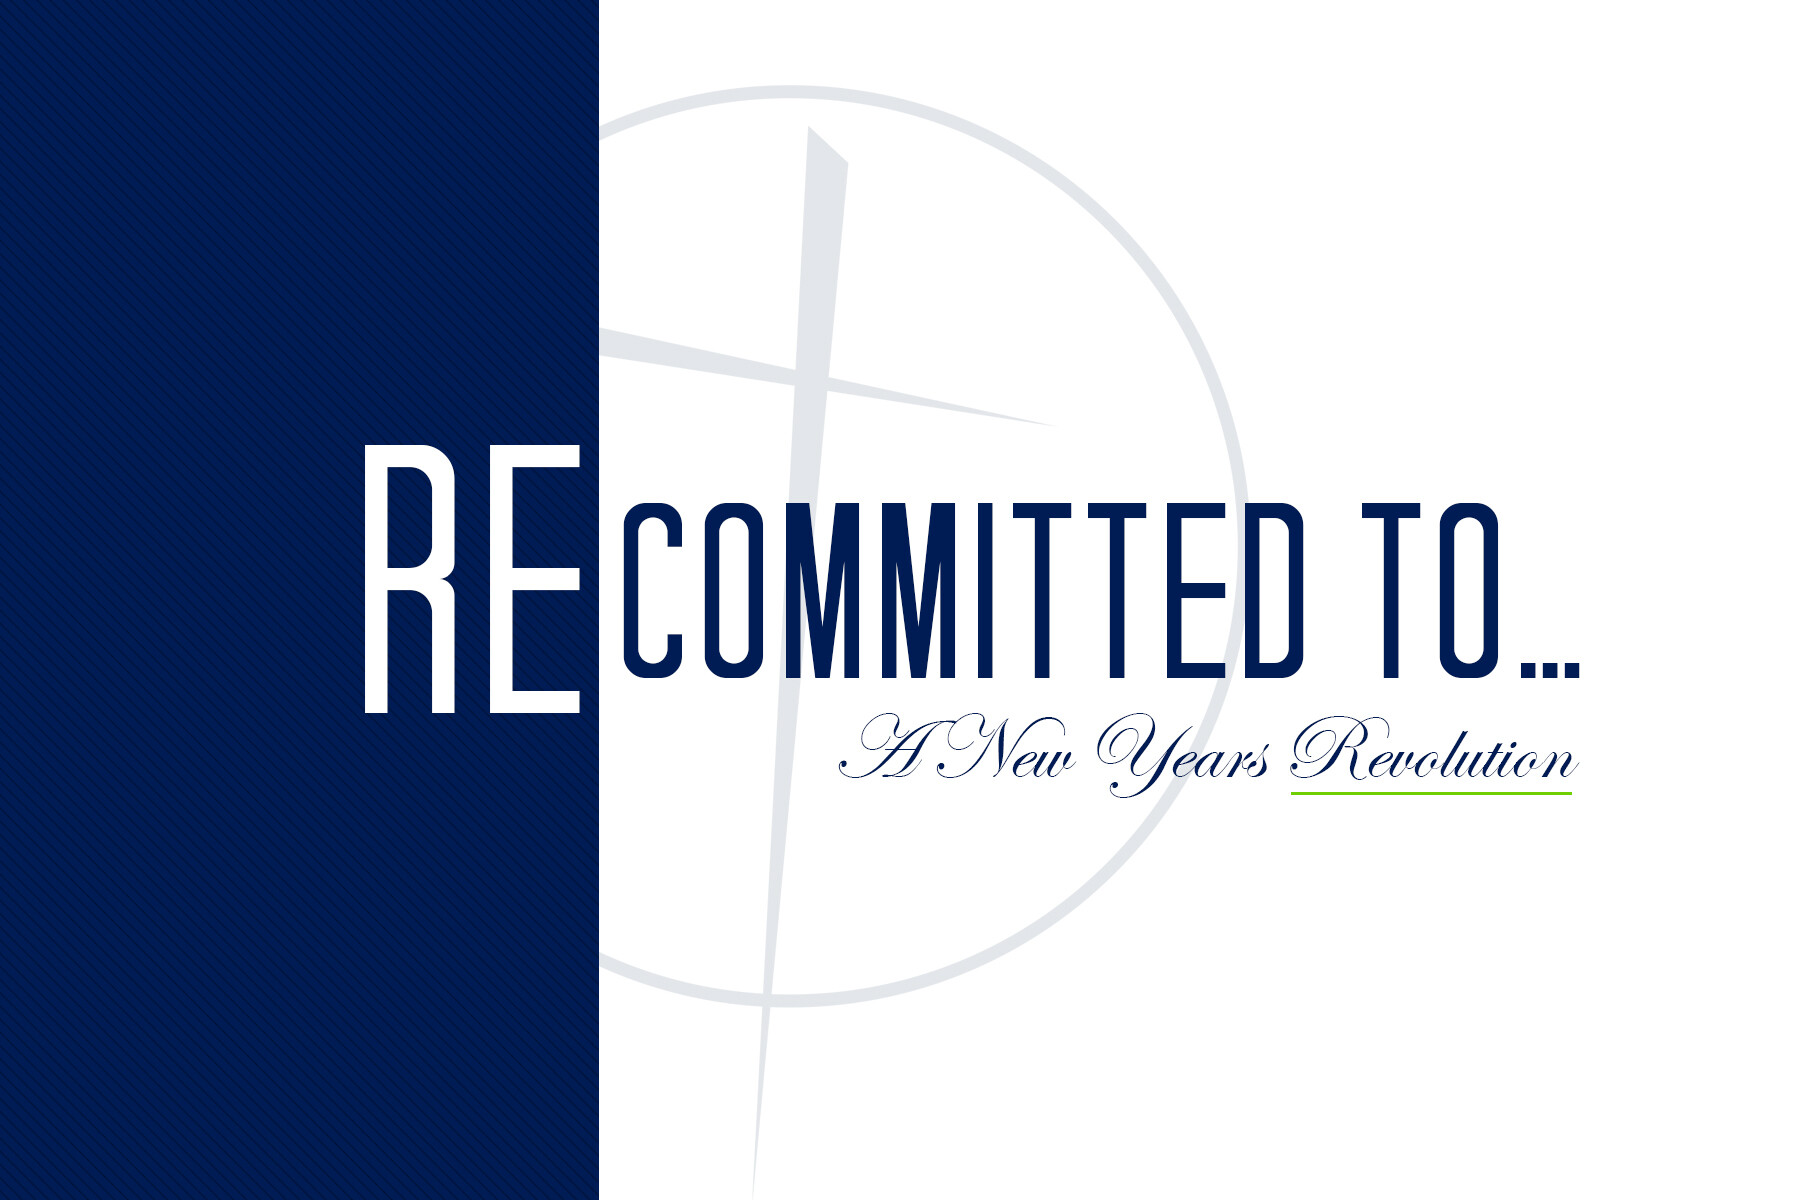 Re:Committed: A New Year's Revolution